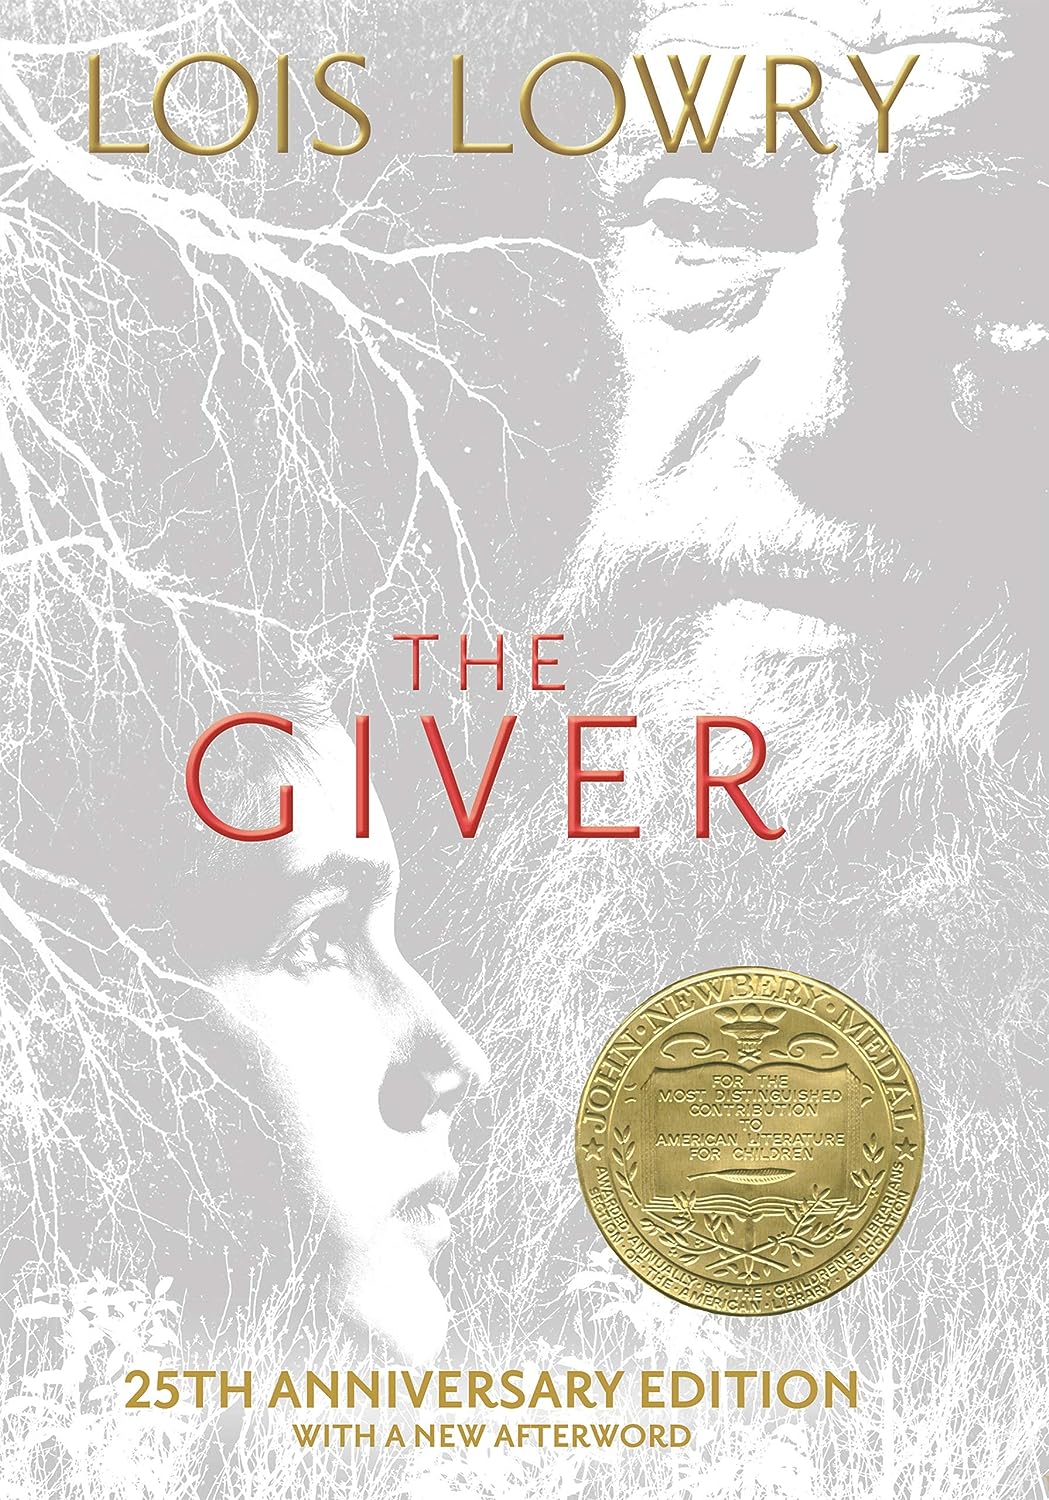 Lois Lowry: Giver (1993, Houghton Mifflin Harcourt Publishing Company)